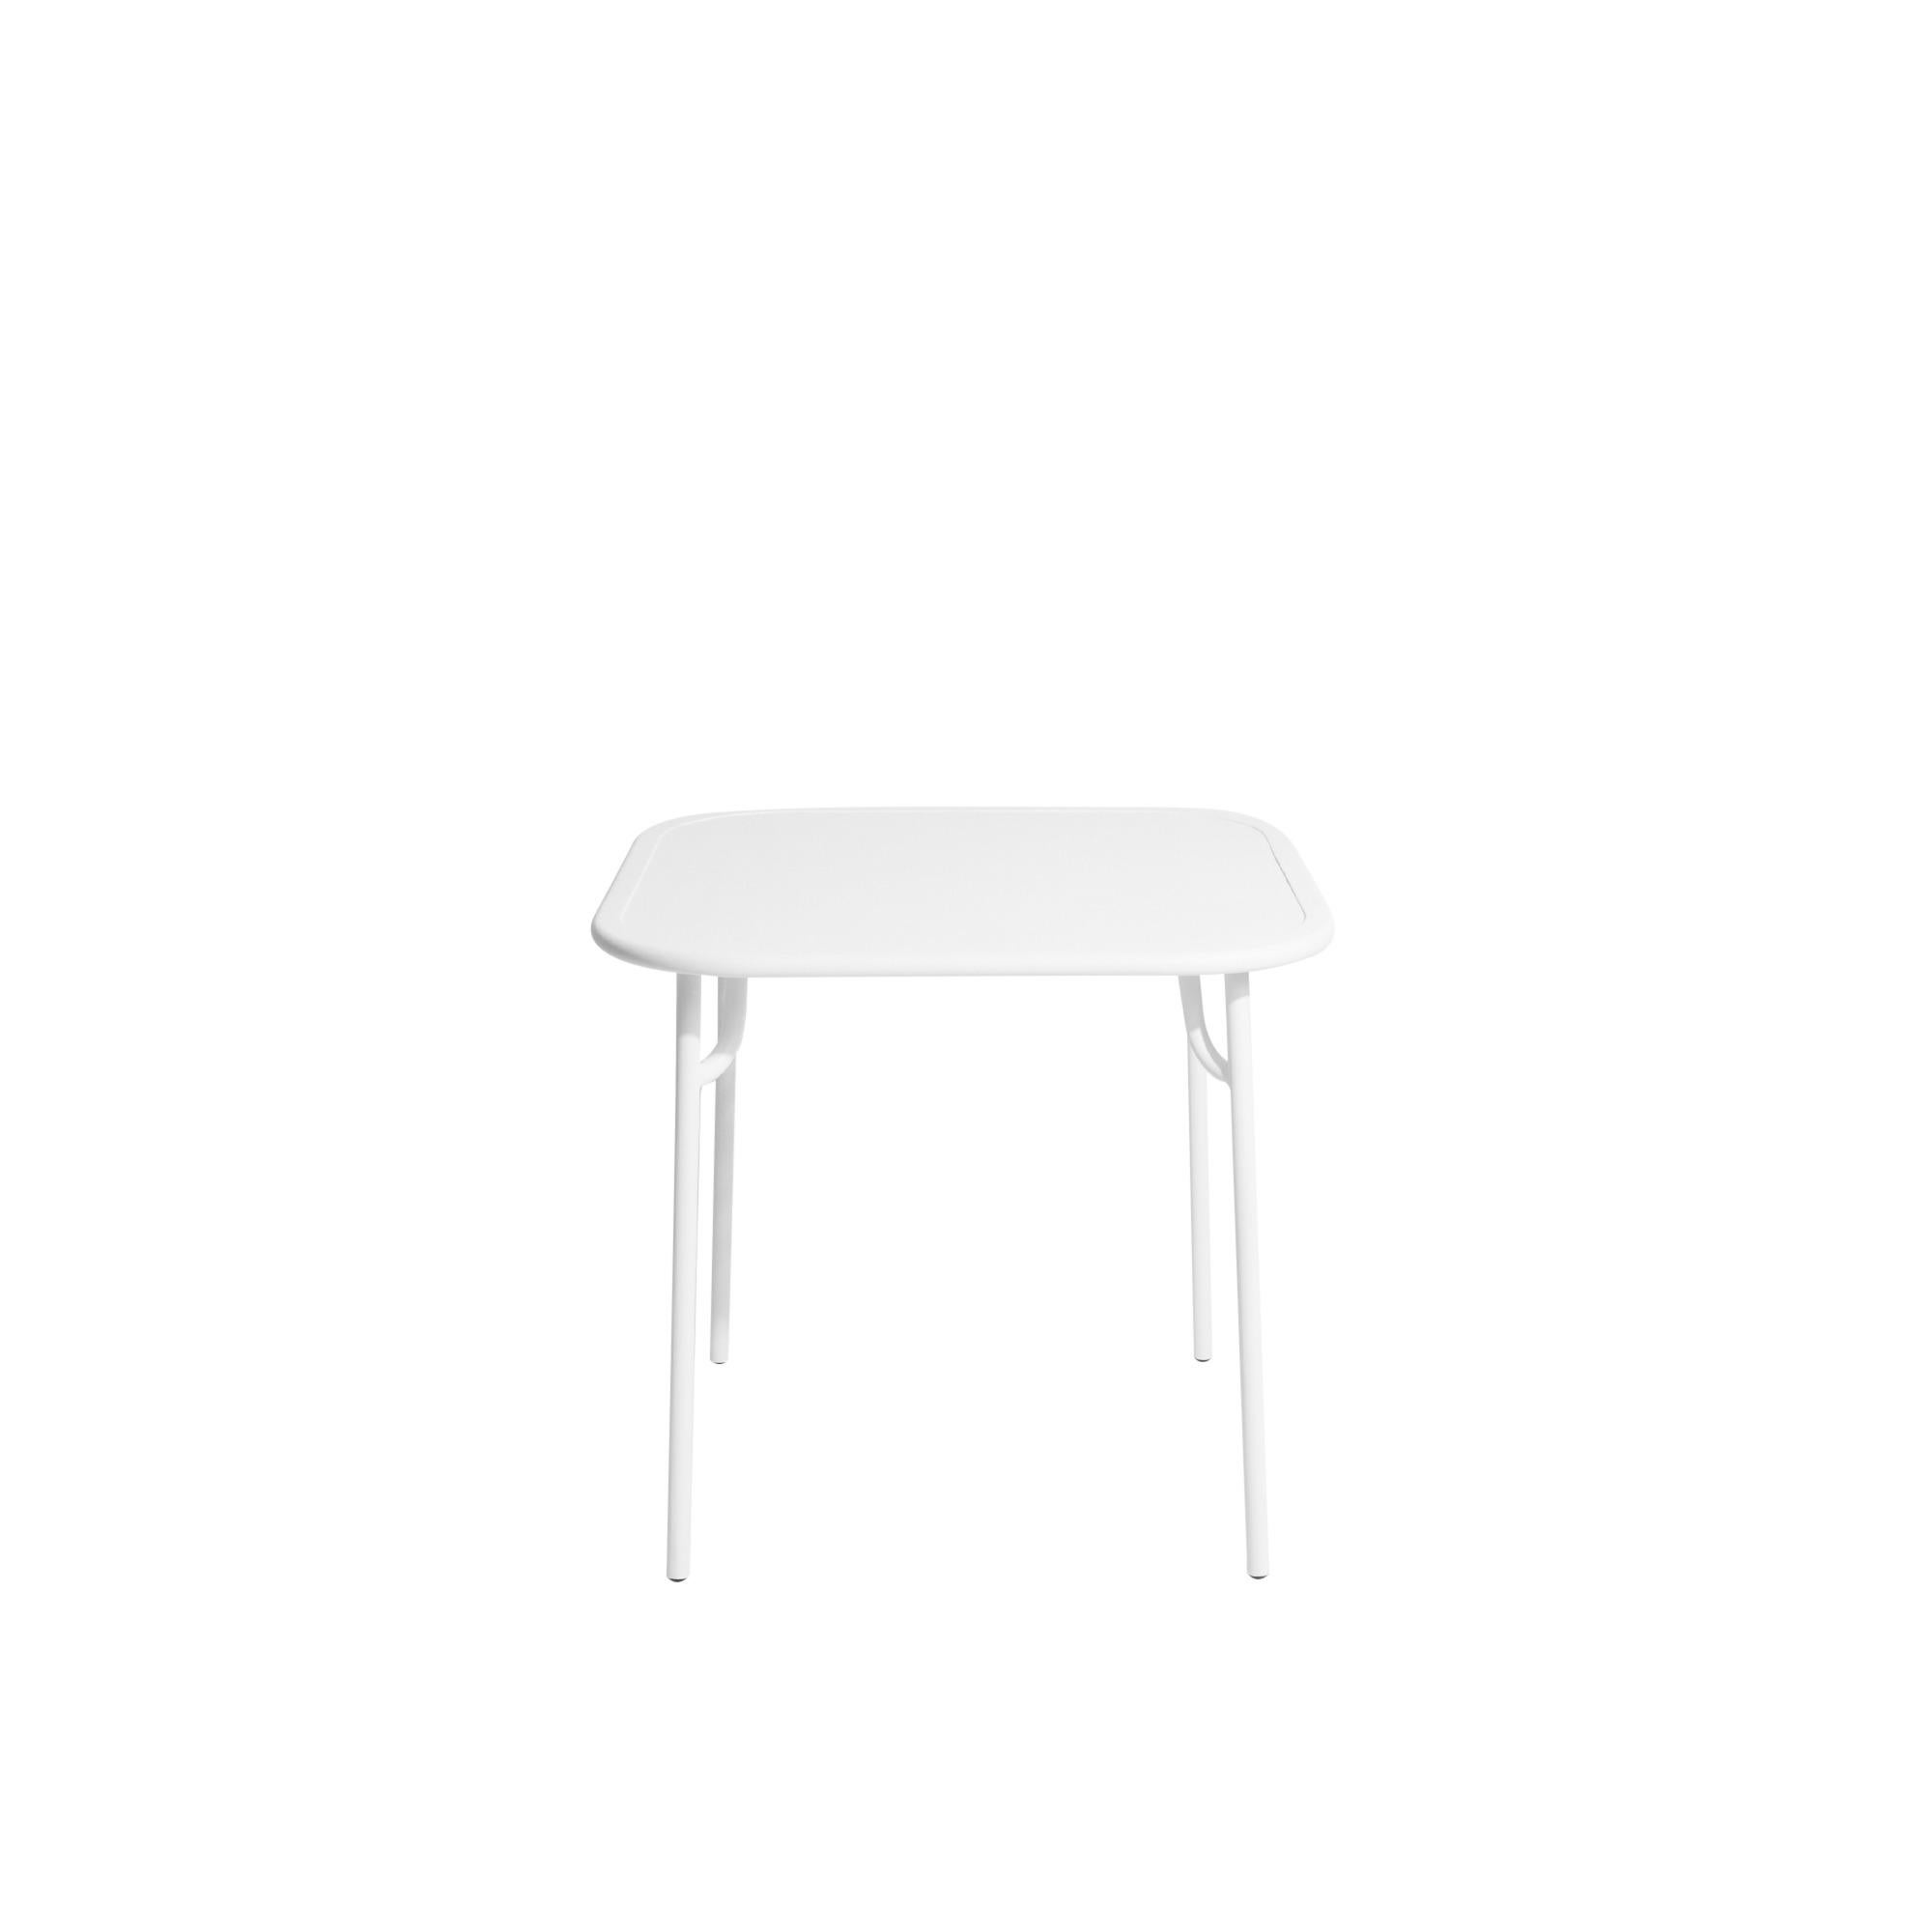 Petite Friture Week-End Plain Square Dining Table in White Aluminium by Studio BrichetZiegler, 2017

The week-end collection is a full range of outdoor furniture, in aluminium grained epoxy paint, matt finish, that includes 18 functions and 8